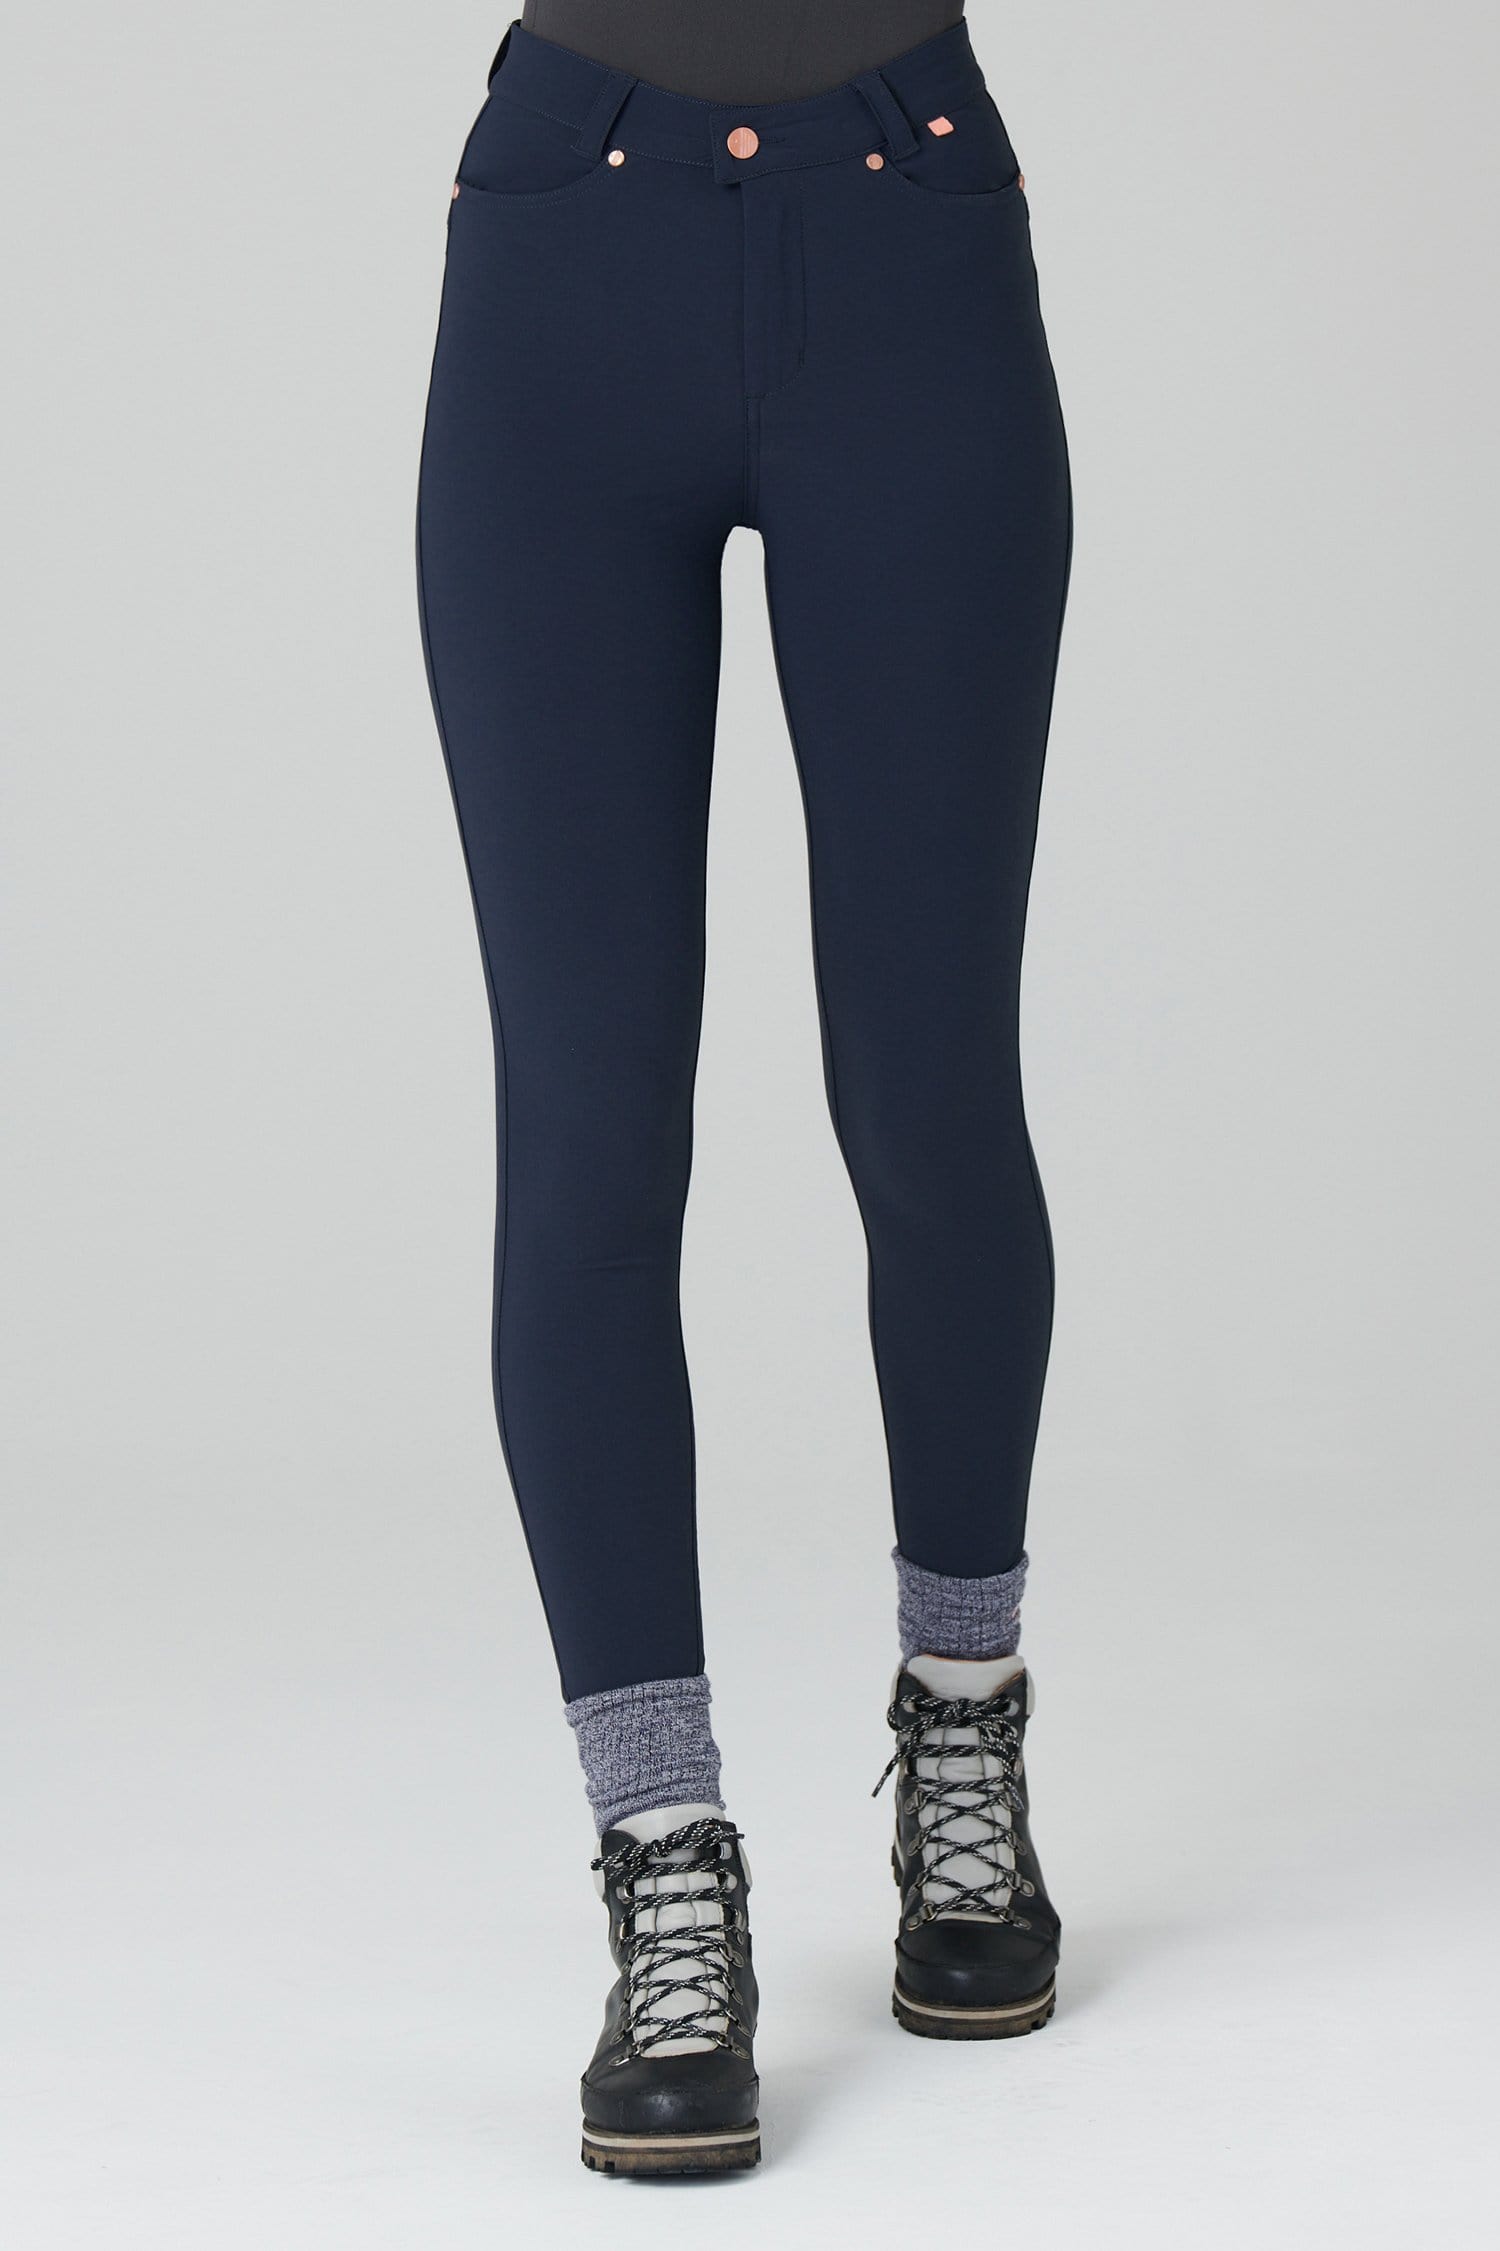 Thermal Skinny Outdoor Trousers - Deep Navy - 26l / Uk8 - Womens - Acai Outdoorwear